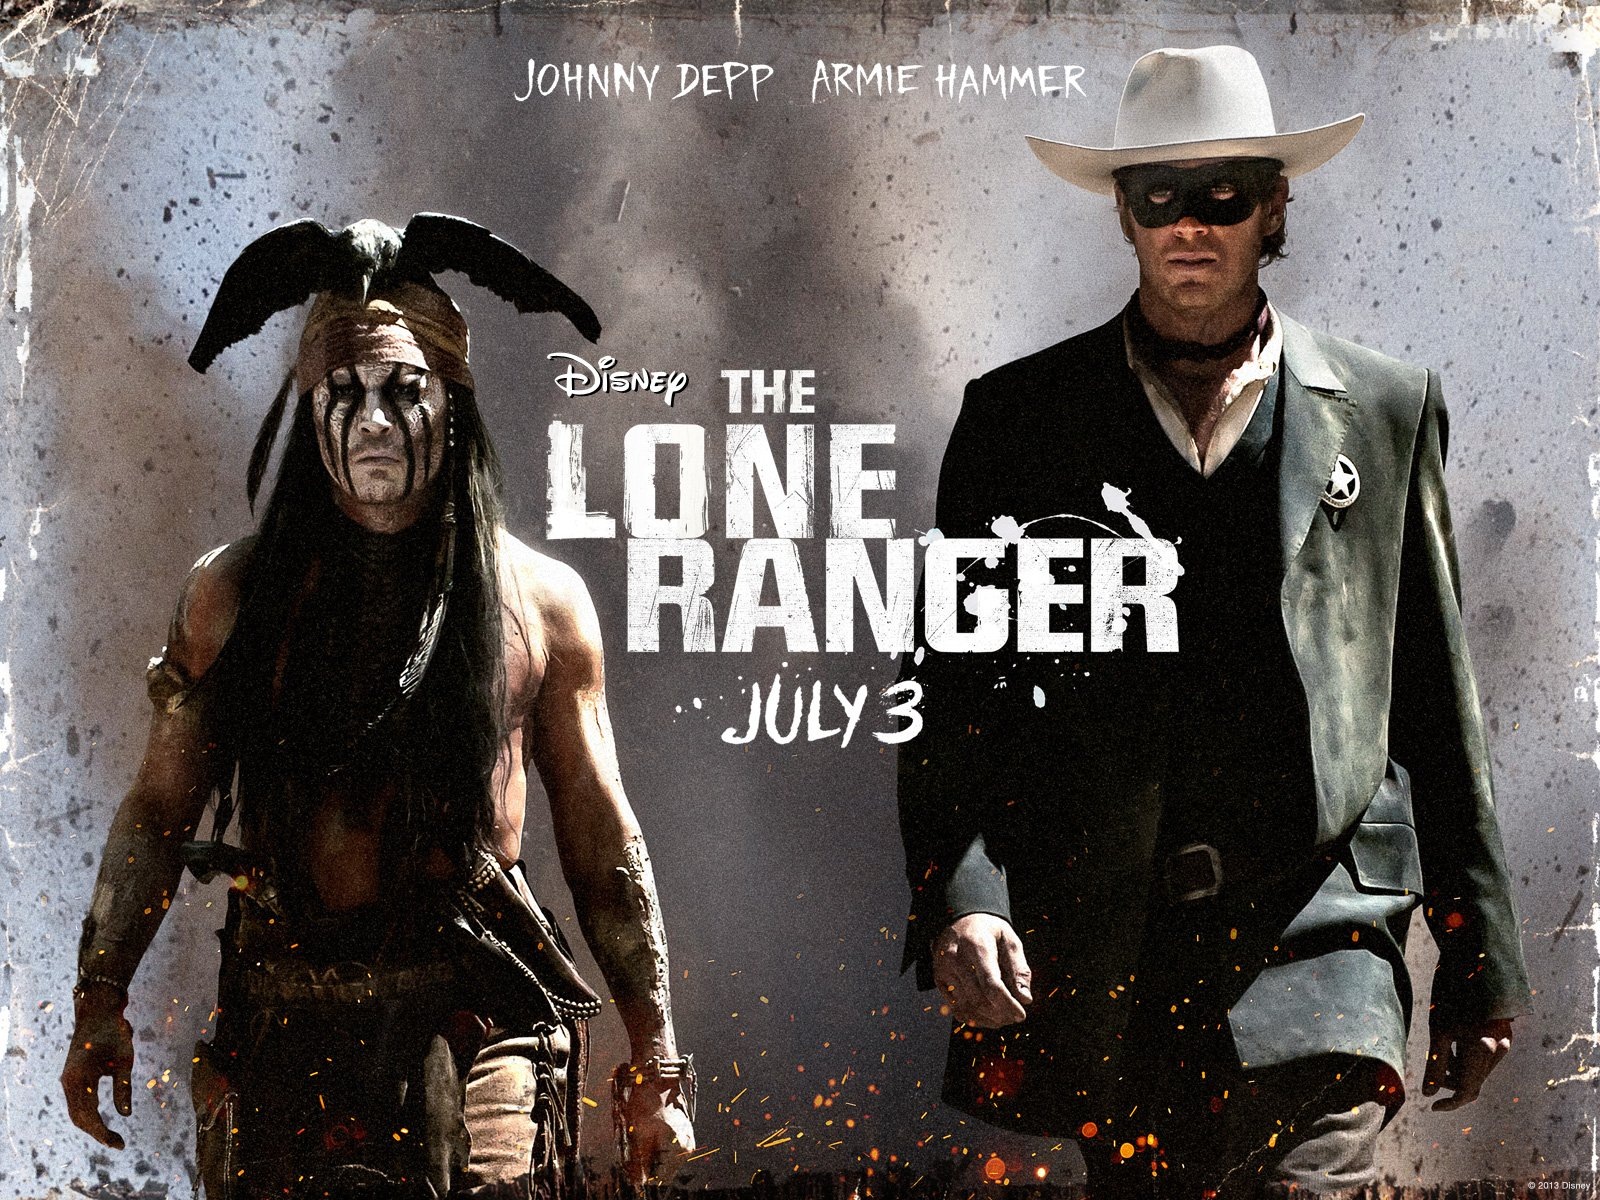 The Lone Ranger HD movie wallpapers #6 - 1600x1200